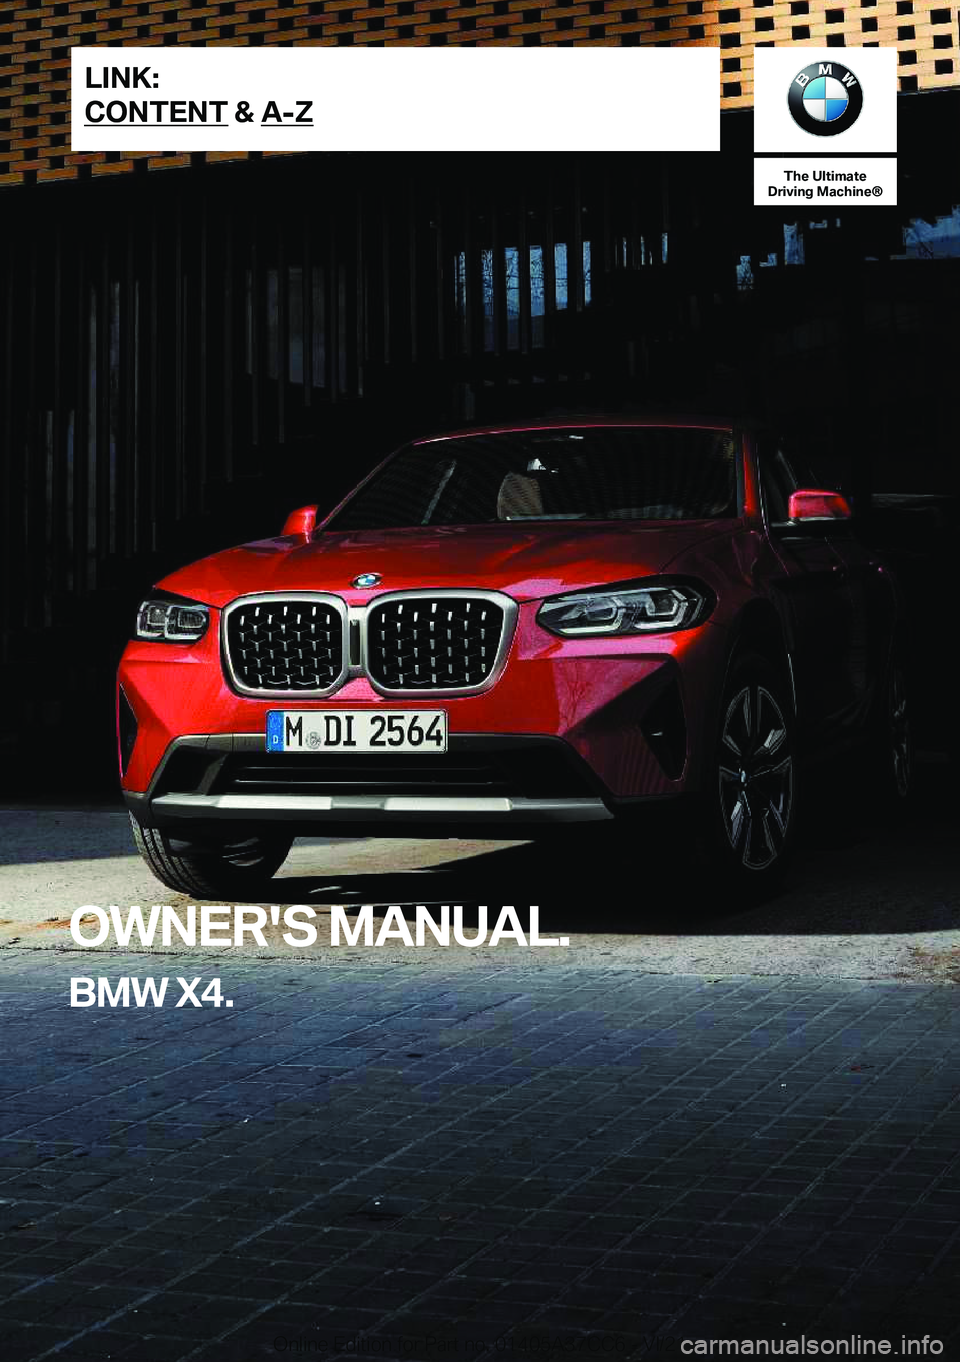 BMW X4 2022  Owners Manual �T�h�e��U�l�t�i�m�a�t�e
�D�r�i�v�i�n�g��M�a�c�h�i�n�e�n
�O�W�N�E�R�'�S��M�A�N�U�A�L�.
�B�M�W��X�4�.�L�I�N�K�:
�C�O�N�T�E�N�T��&��A�-�Z�O�n�l�i�n�e��E�d�i�t�i�o�n��f�o�r��P�a�r�t��n�o�.�